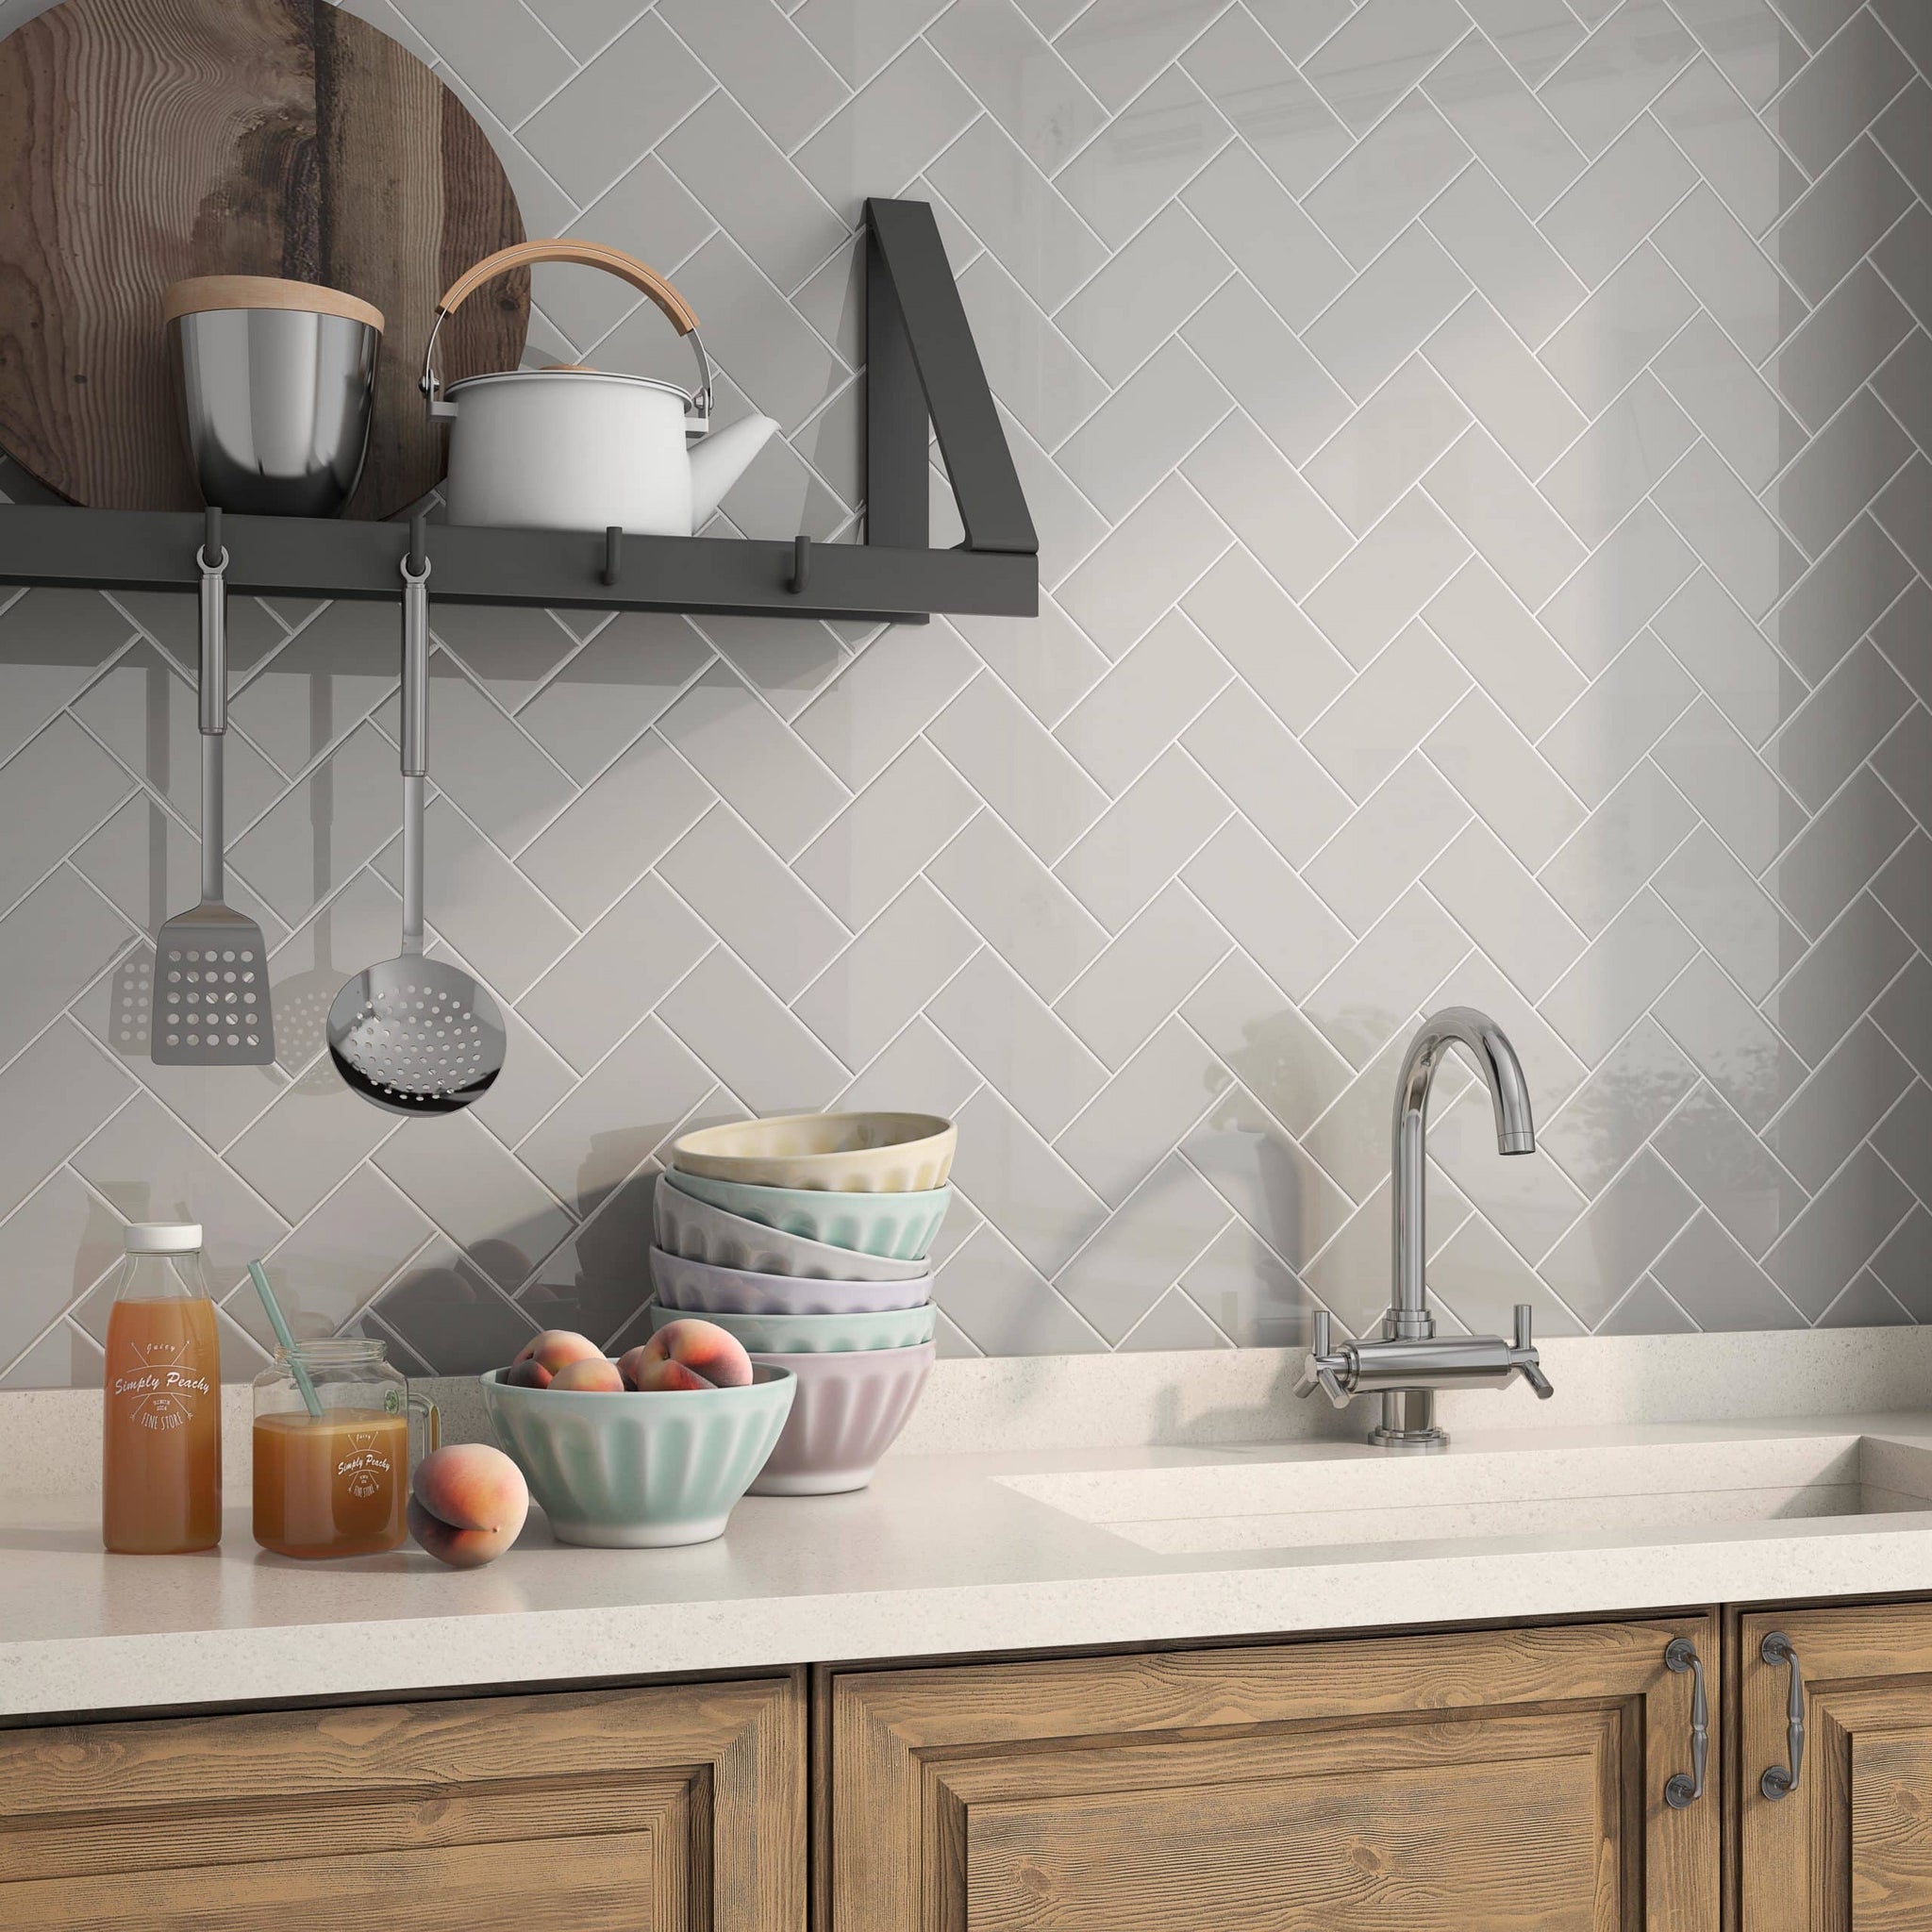 Minimalistic Picket Tile 2x10 Grey Glossy for Kitchen and Bathroom